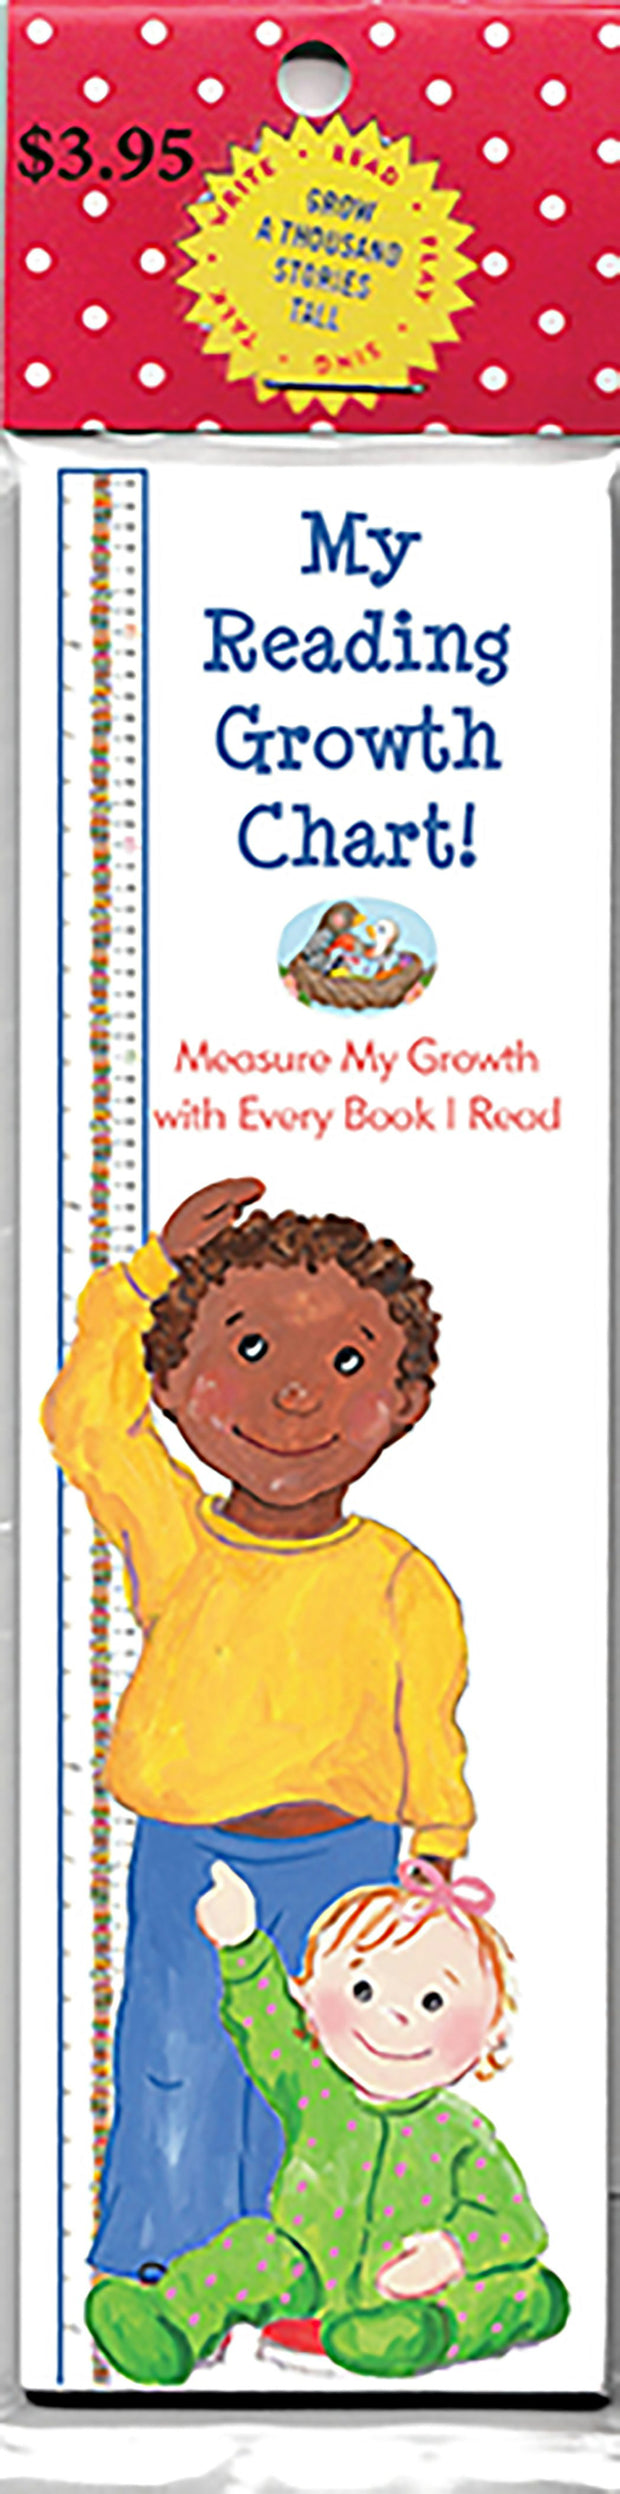 My Reading Growth Chart!